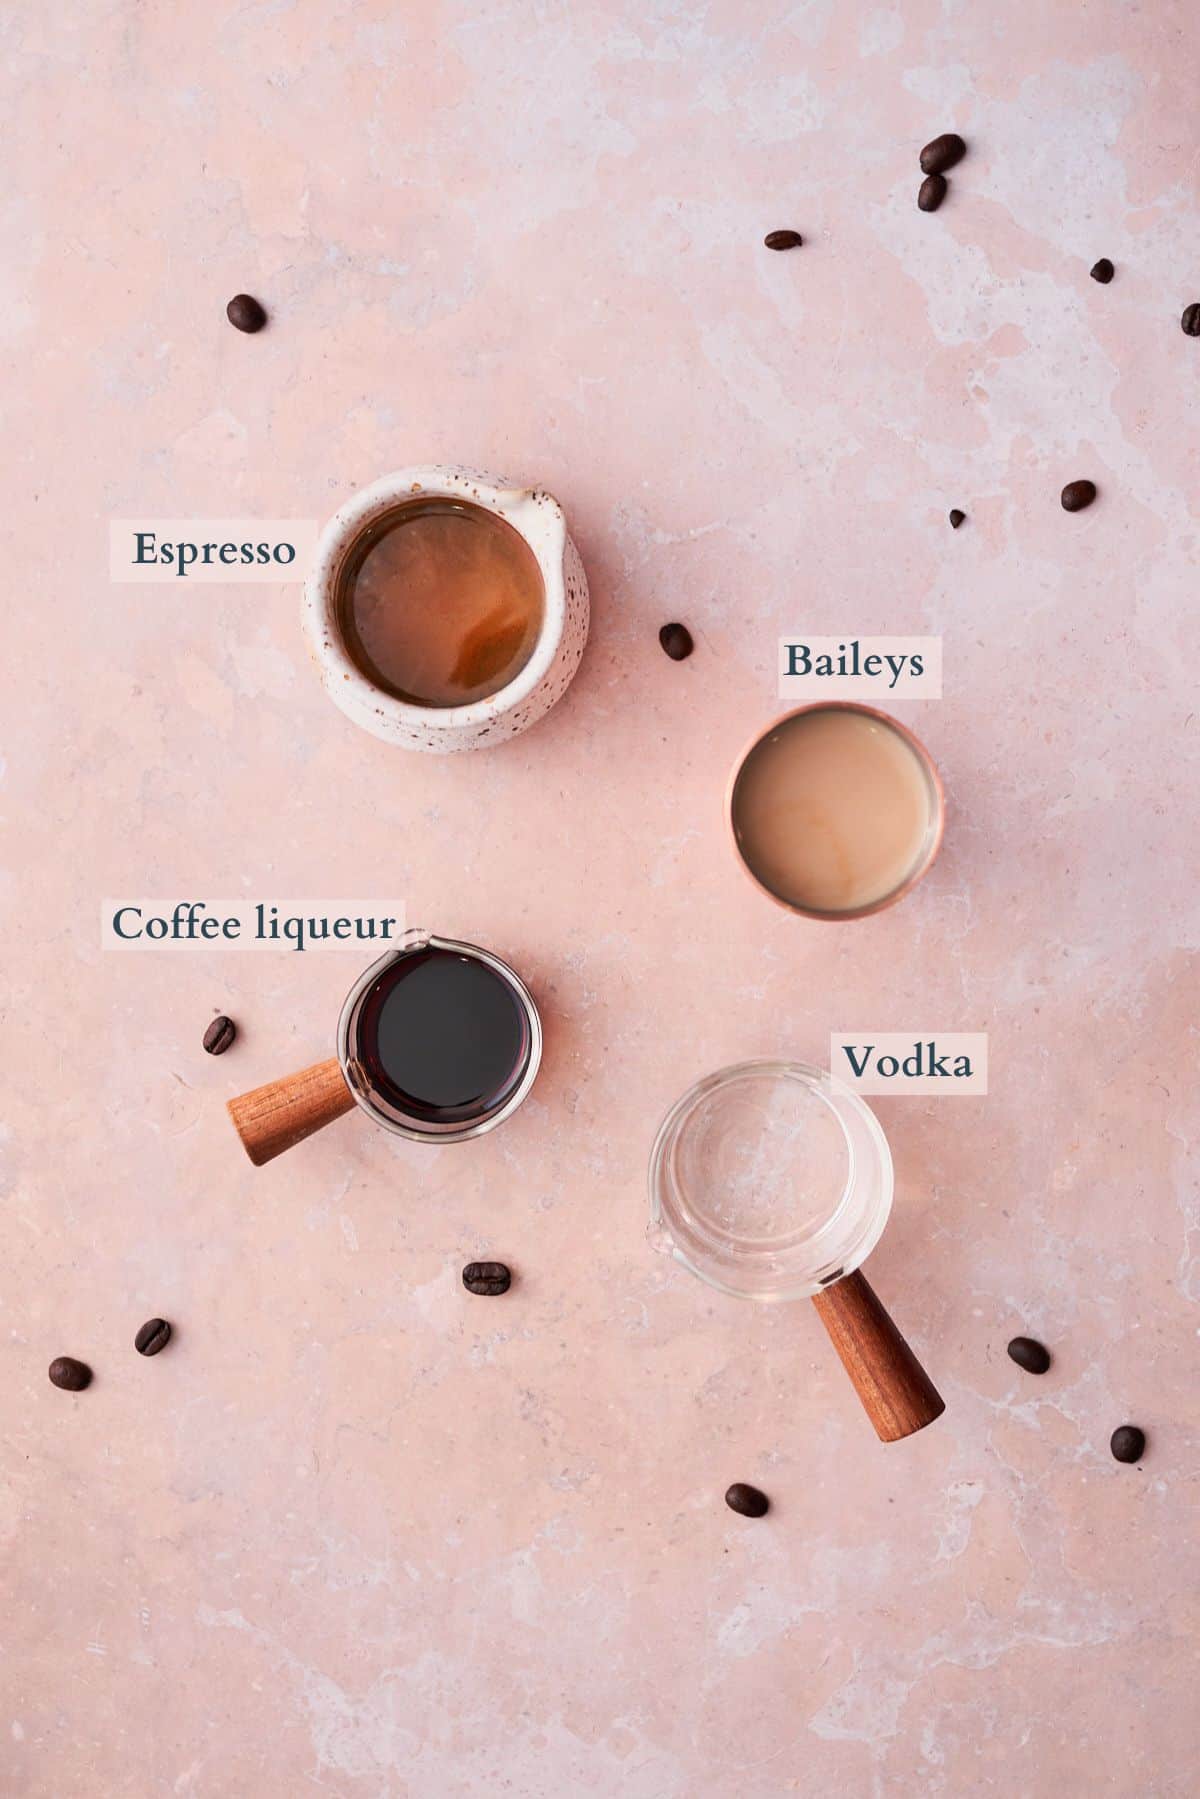 espresso martini with baileys ingredients graphic with text overlaying to denote each ingredient. 